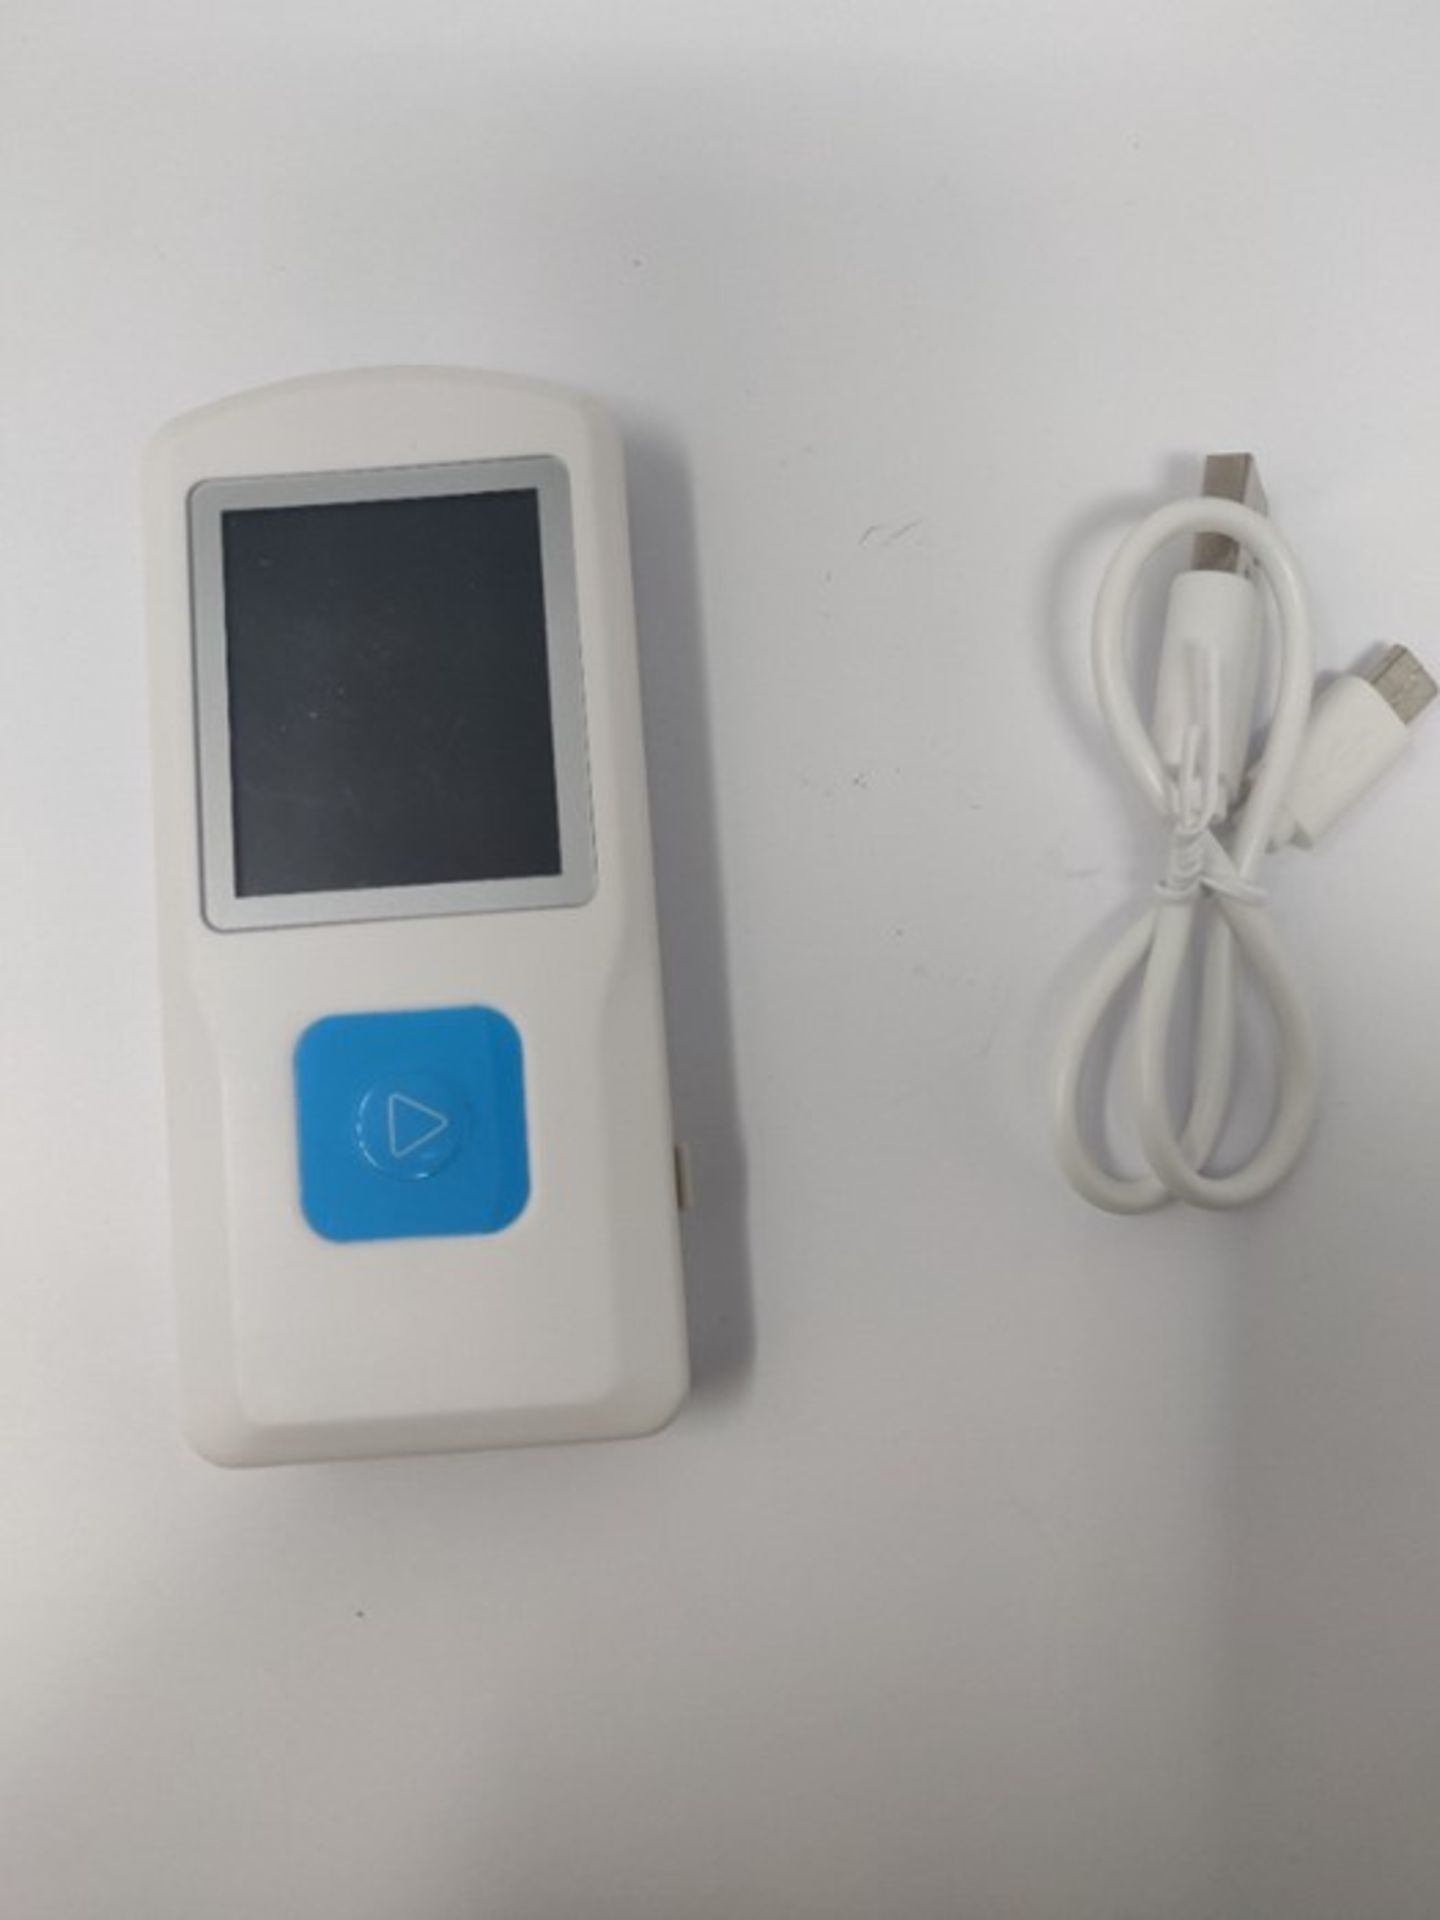 SingDeRing Portable ECG EKG Heart Rate Monitor for Home Use, Mobile Bluetooth ECG Elec - Image 3 of 3